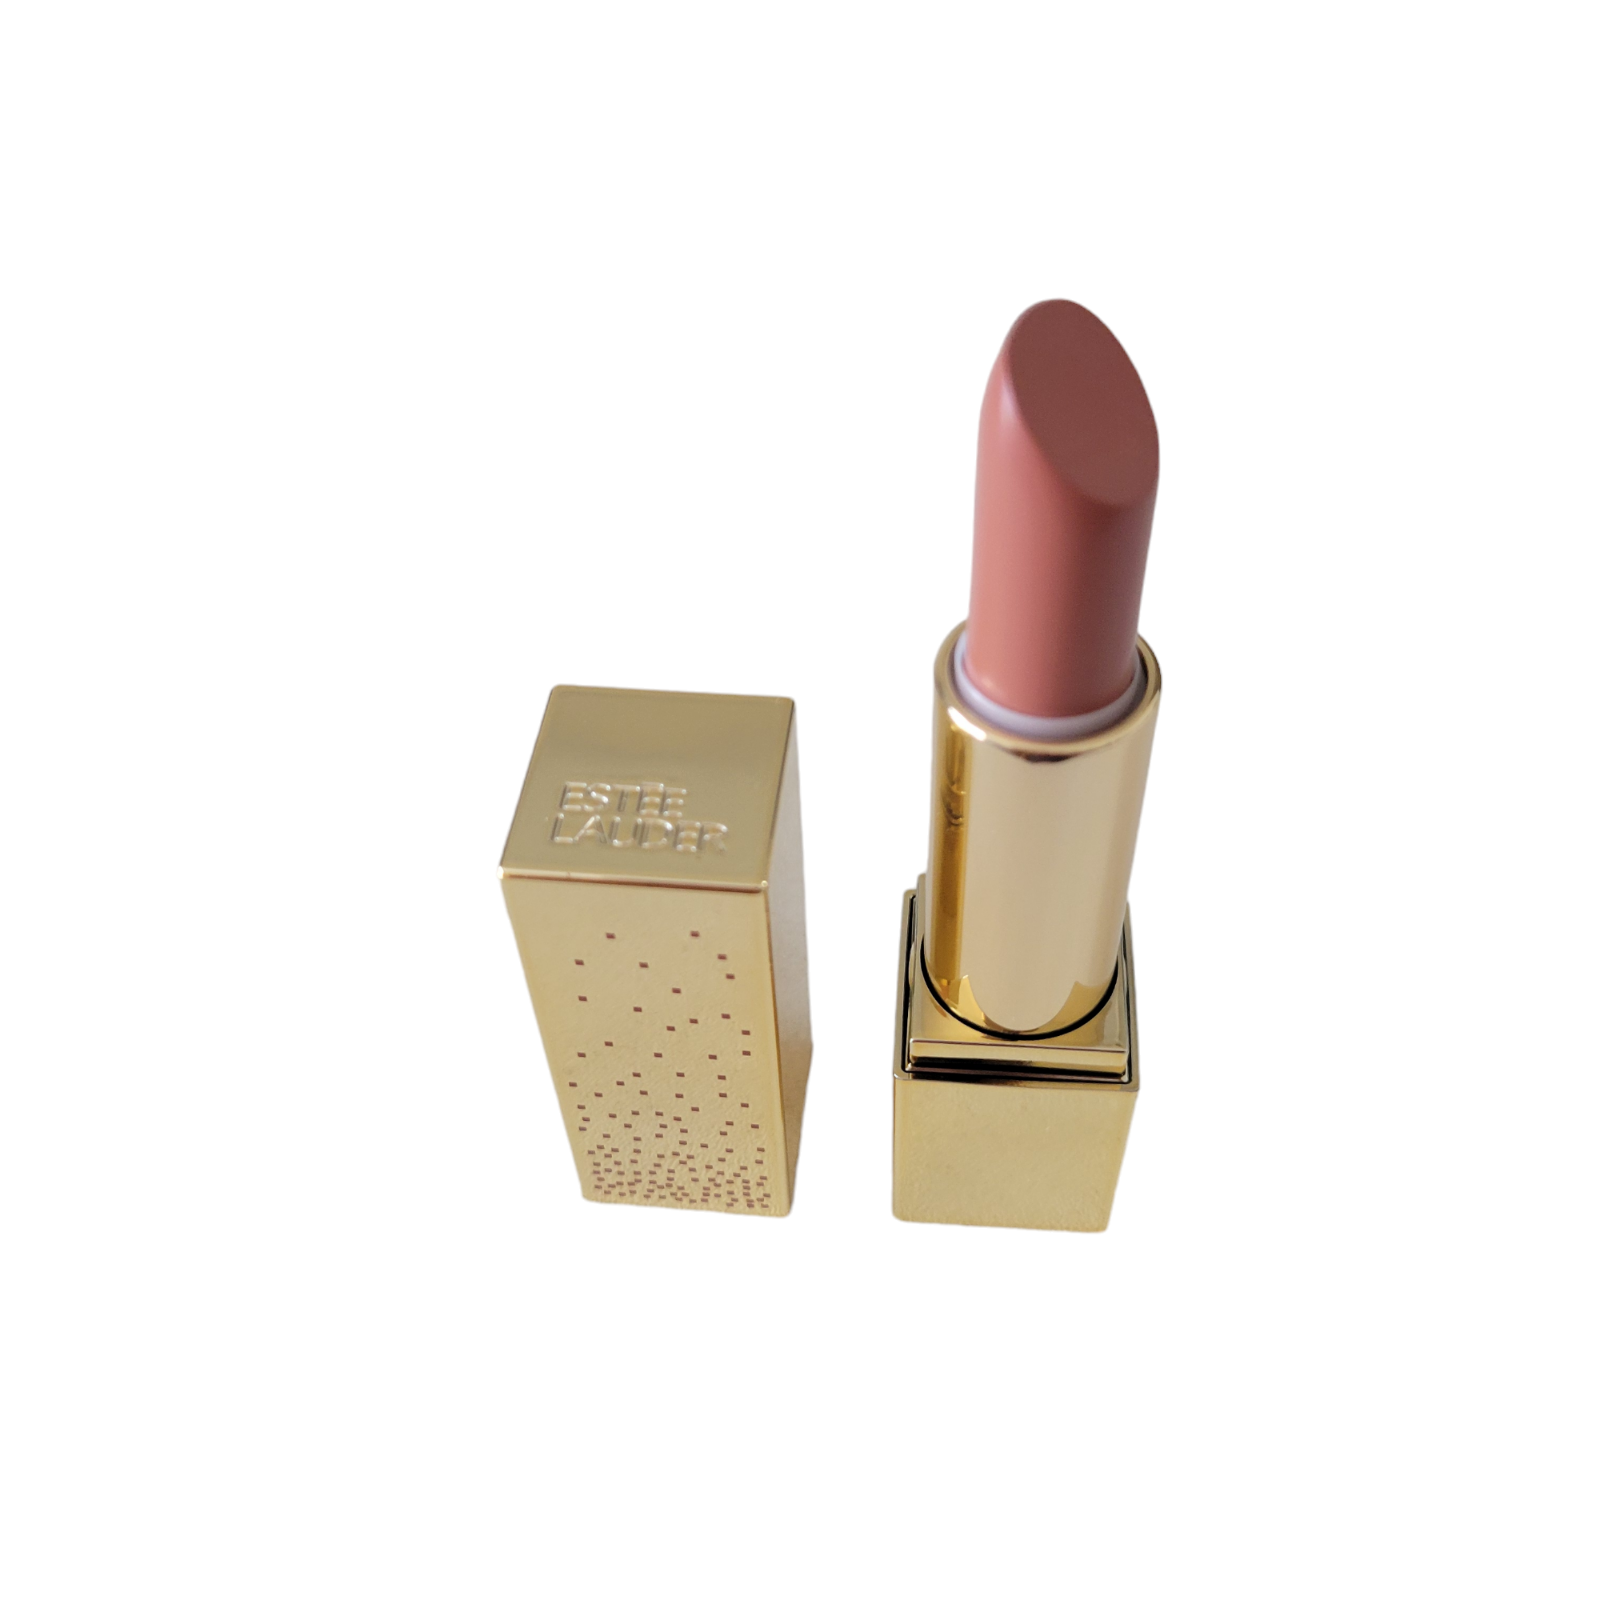 Estee Lauder Pure Color Envy Sculpting Lipstick 122 Naked Desire New without Box - $34.38